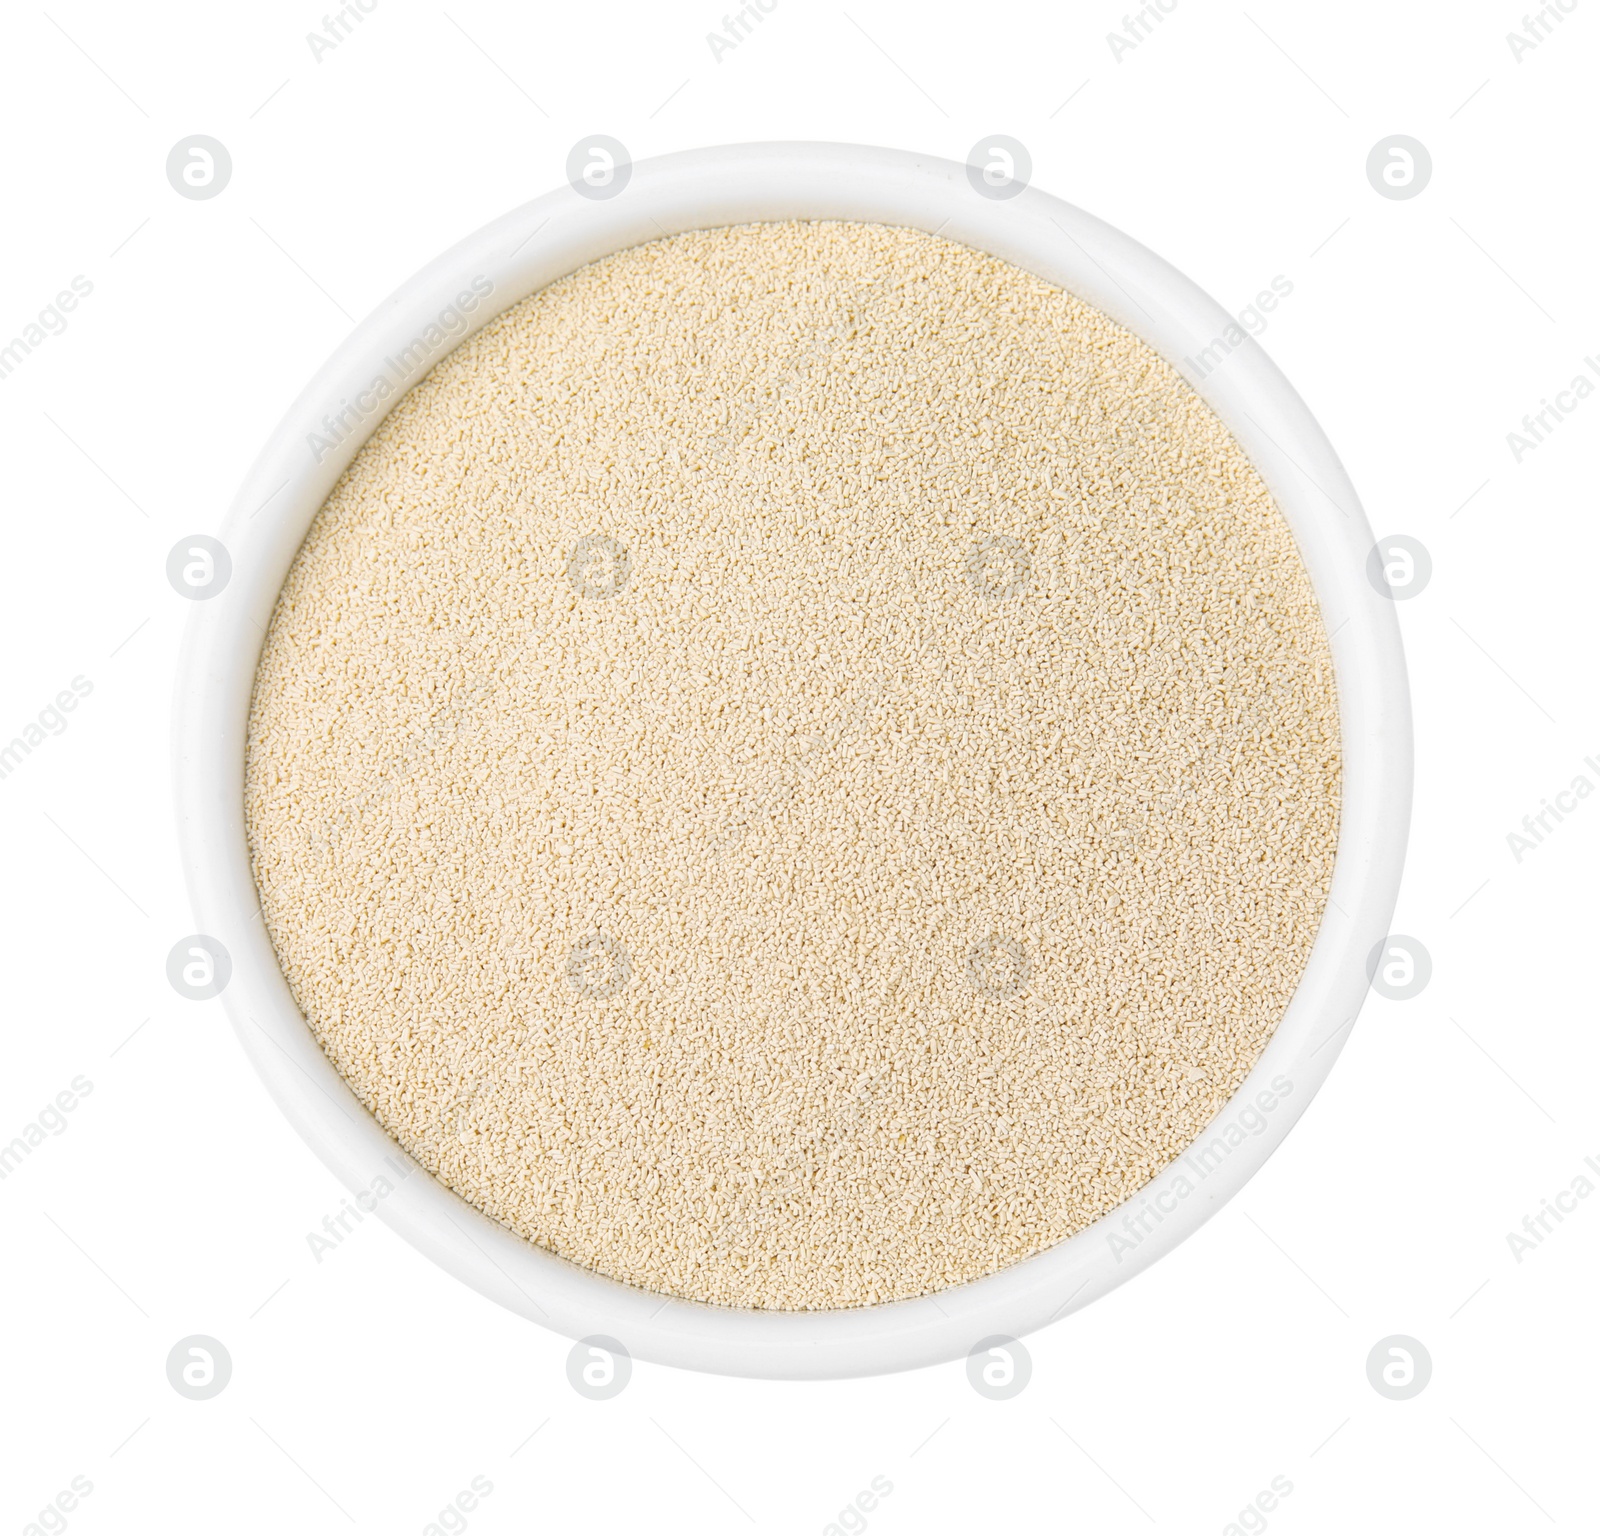 Photo of Granulated yeast in bowl on white background, top view